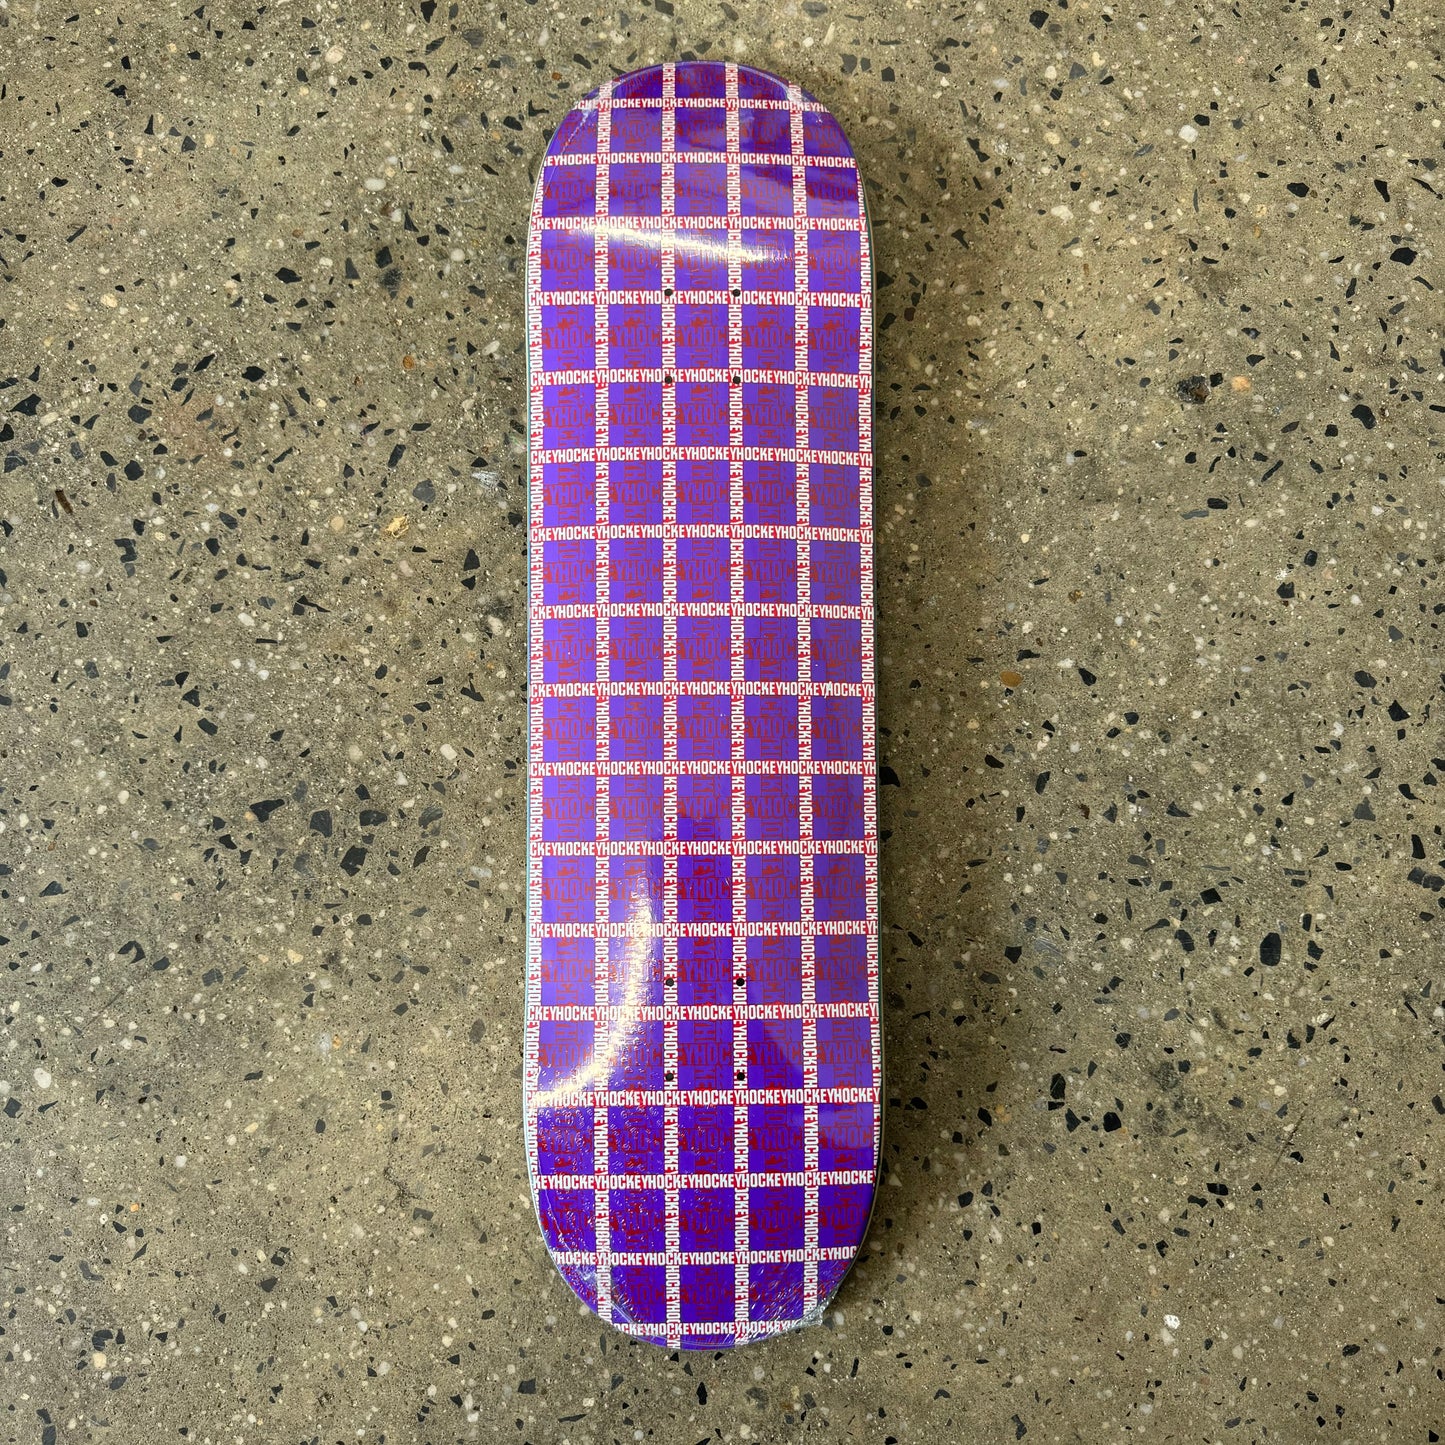 red and white plaid on purple skate deck